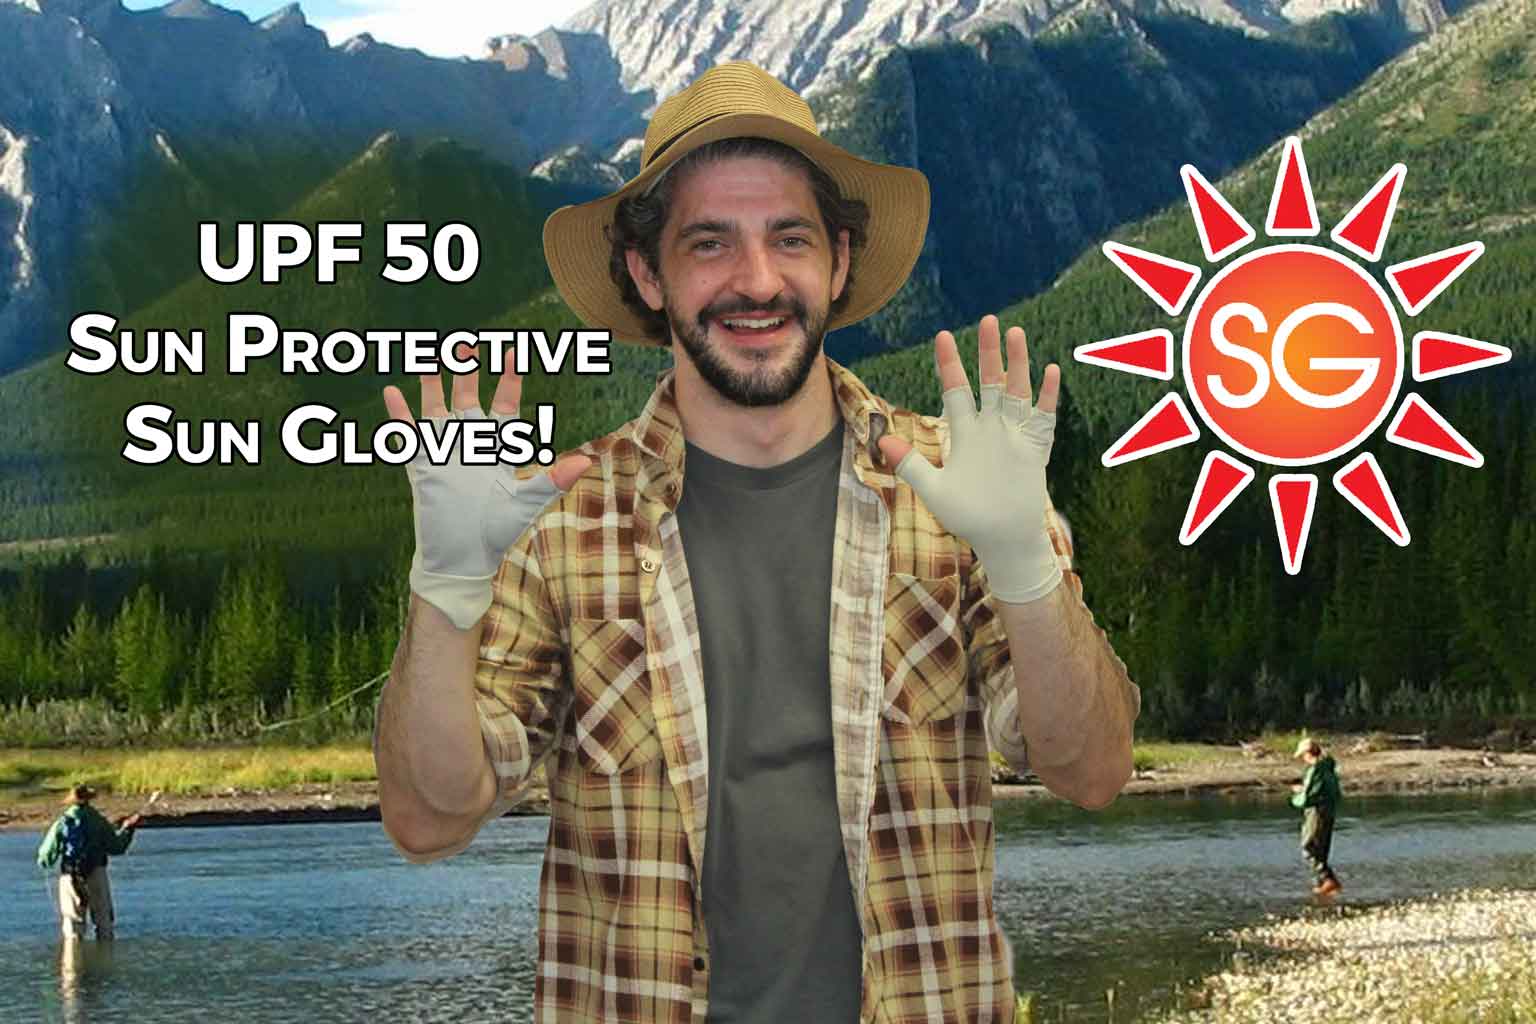 Best Ways To Maximize Sun Protection For Your Hands With Sun